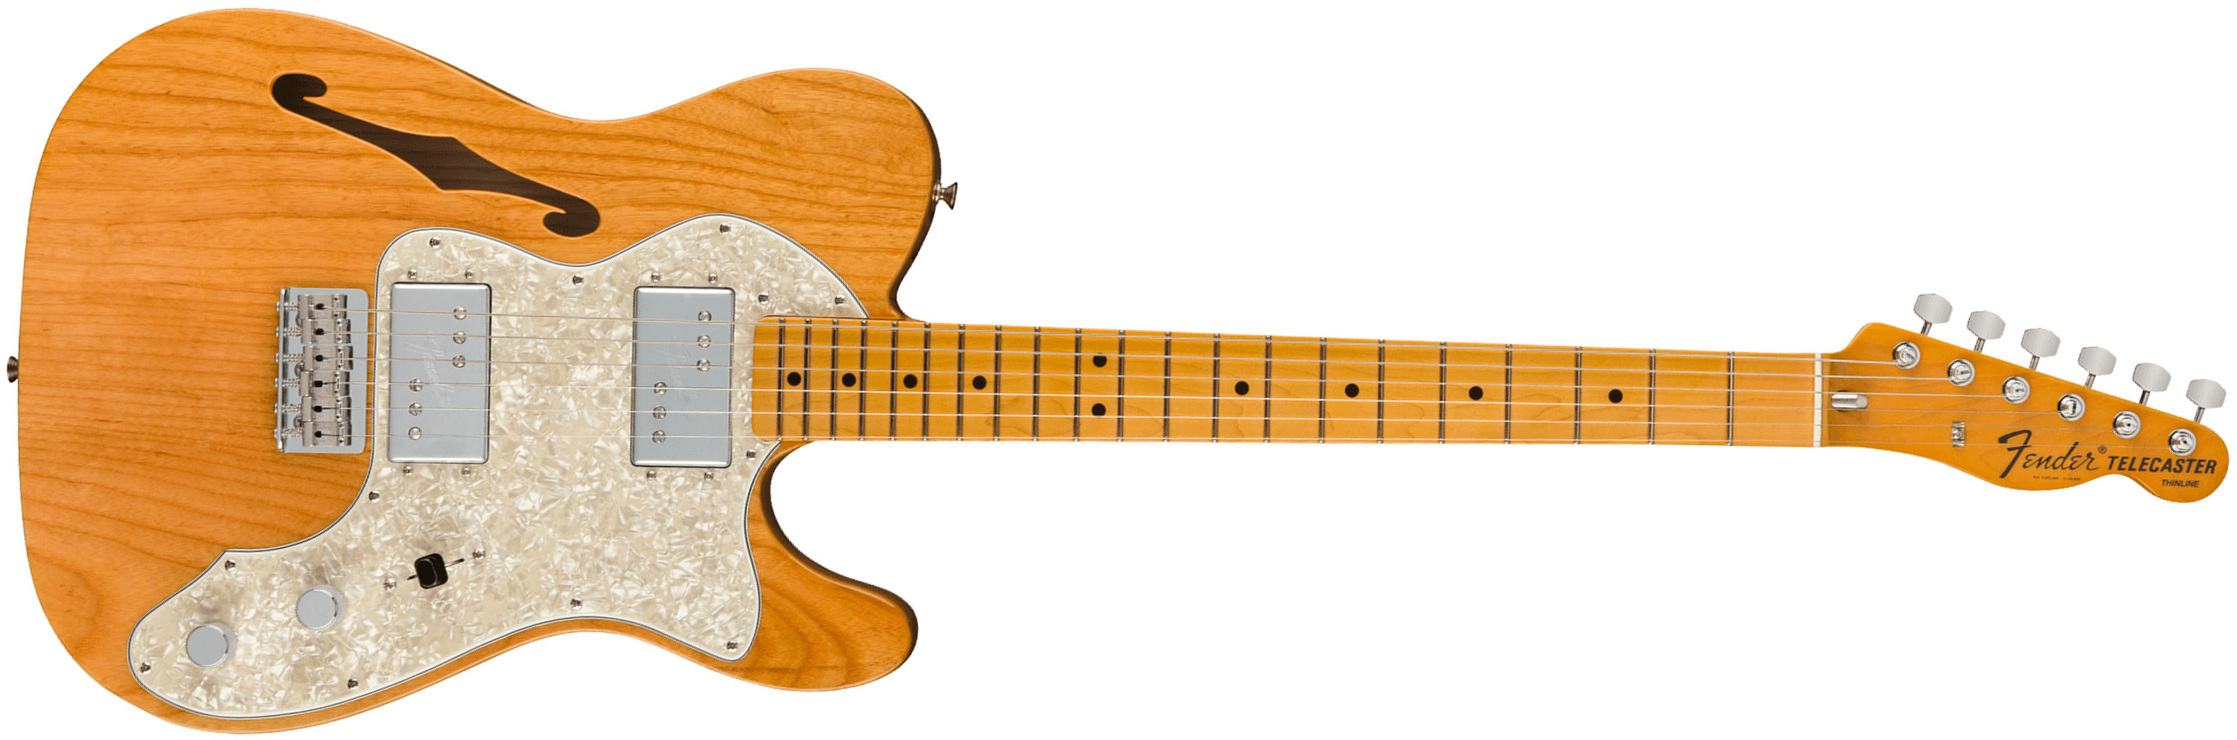 Fender Tele Thinline 1972 American Vintage Ii Usa 2h Ht Mn - Aged Natural - Semi-hollow electric guitar - Main picture